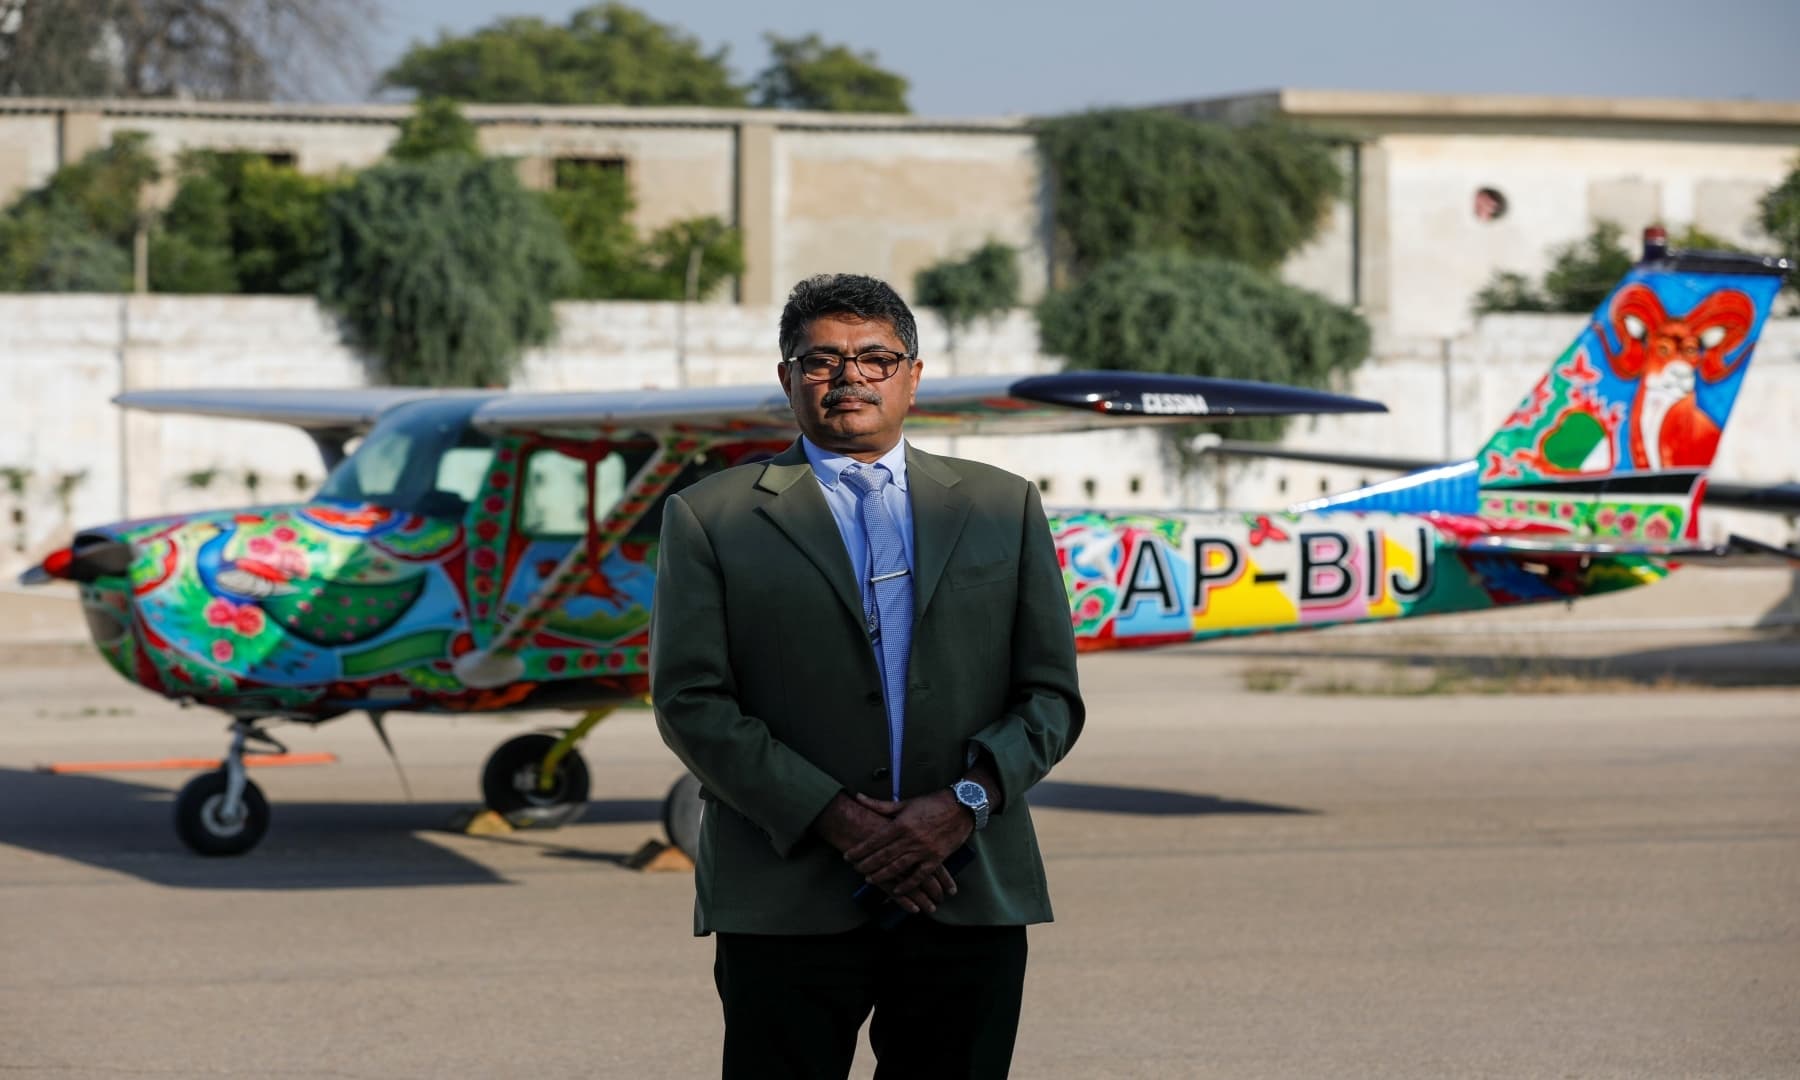 Imran Aslam Khan, Chief Operating Officer of Sky Wings, poses with a two-seater Cessna aircraft painted with Pakistani truck art in the background, at Jinnah International Airport, Karachi, Dec 30, 2020. — Reuters